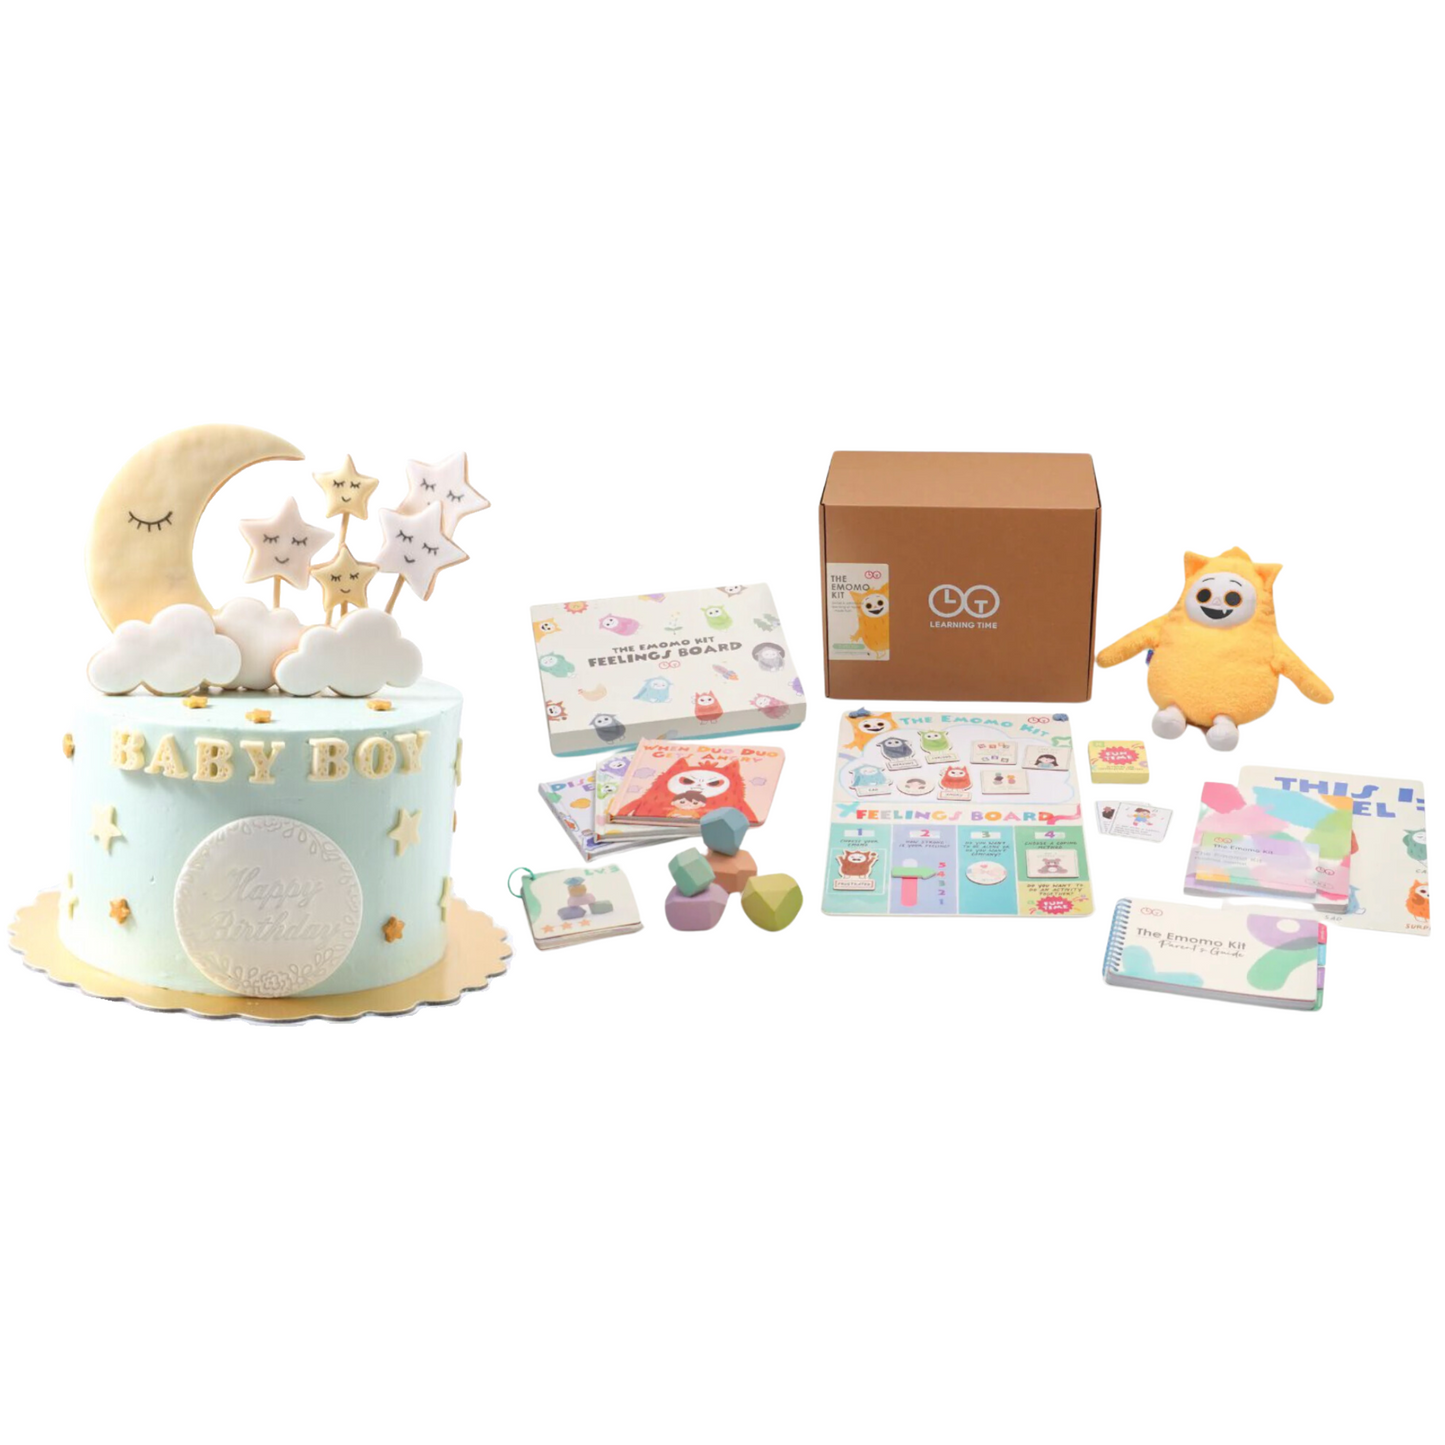 Sweet Dream and Learning Time Gift Bundle